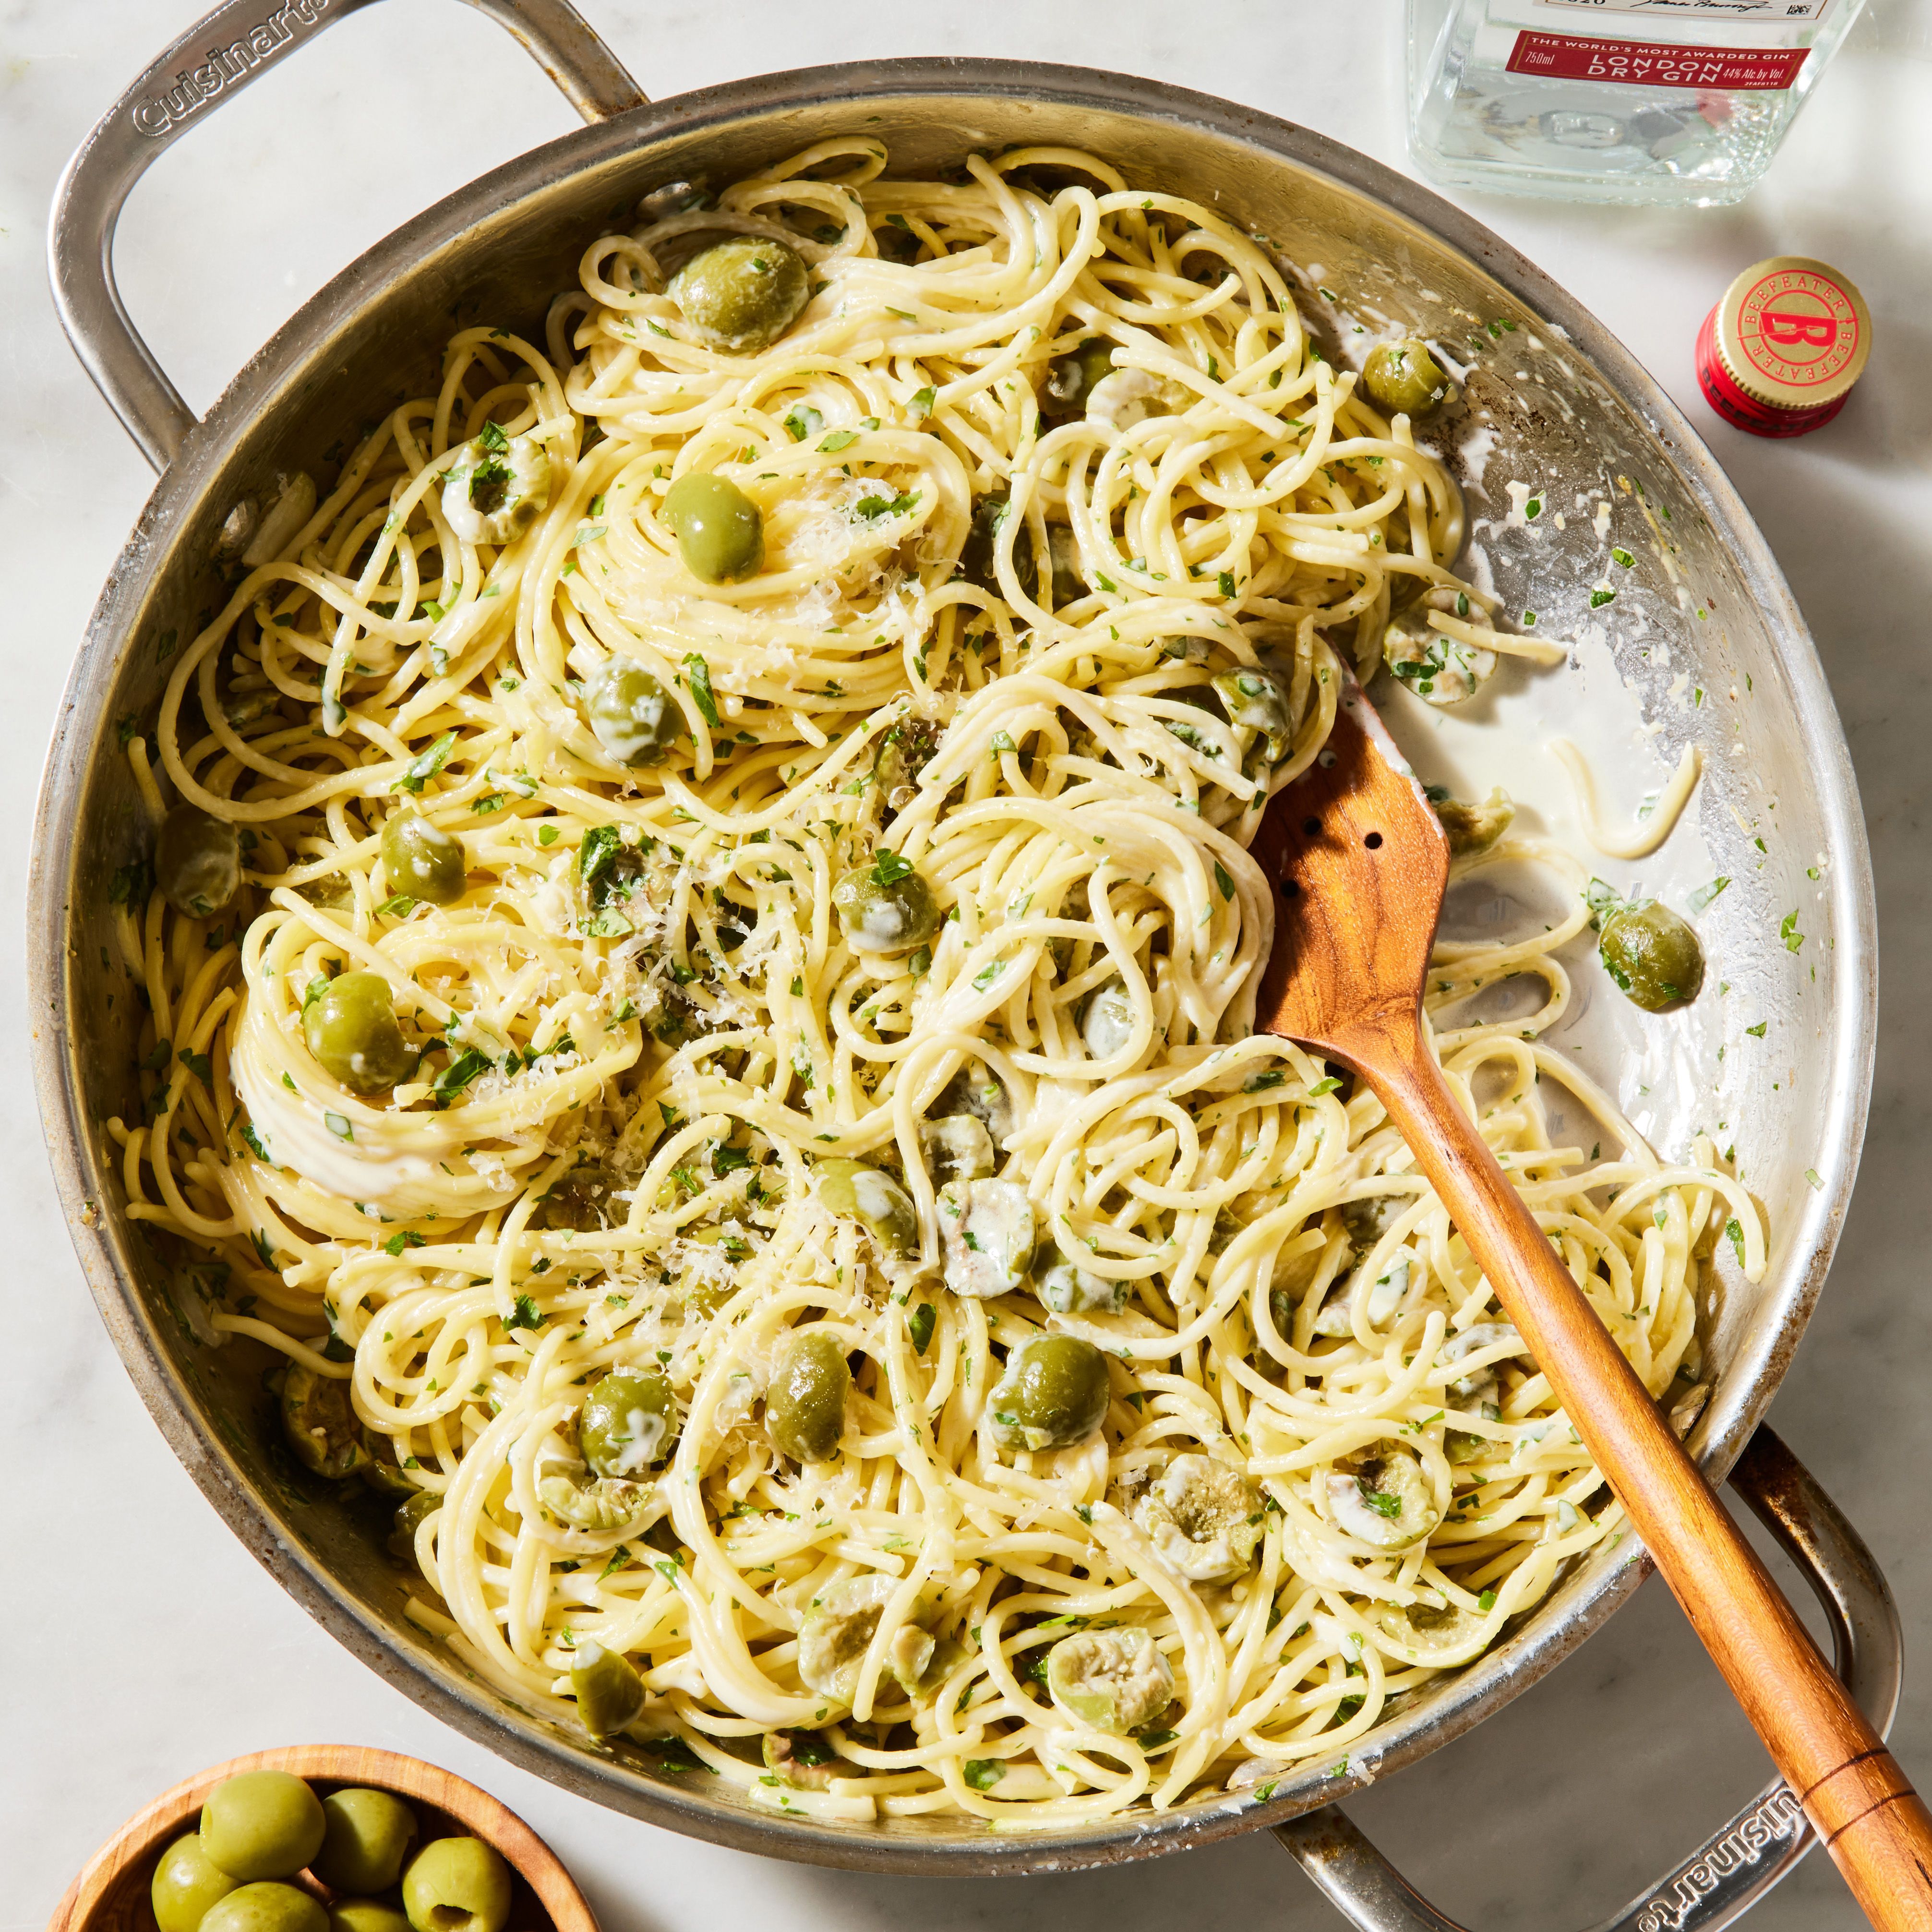 The best pasta makers for delicious homemade dinners